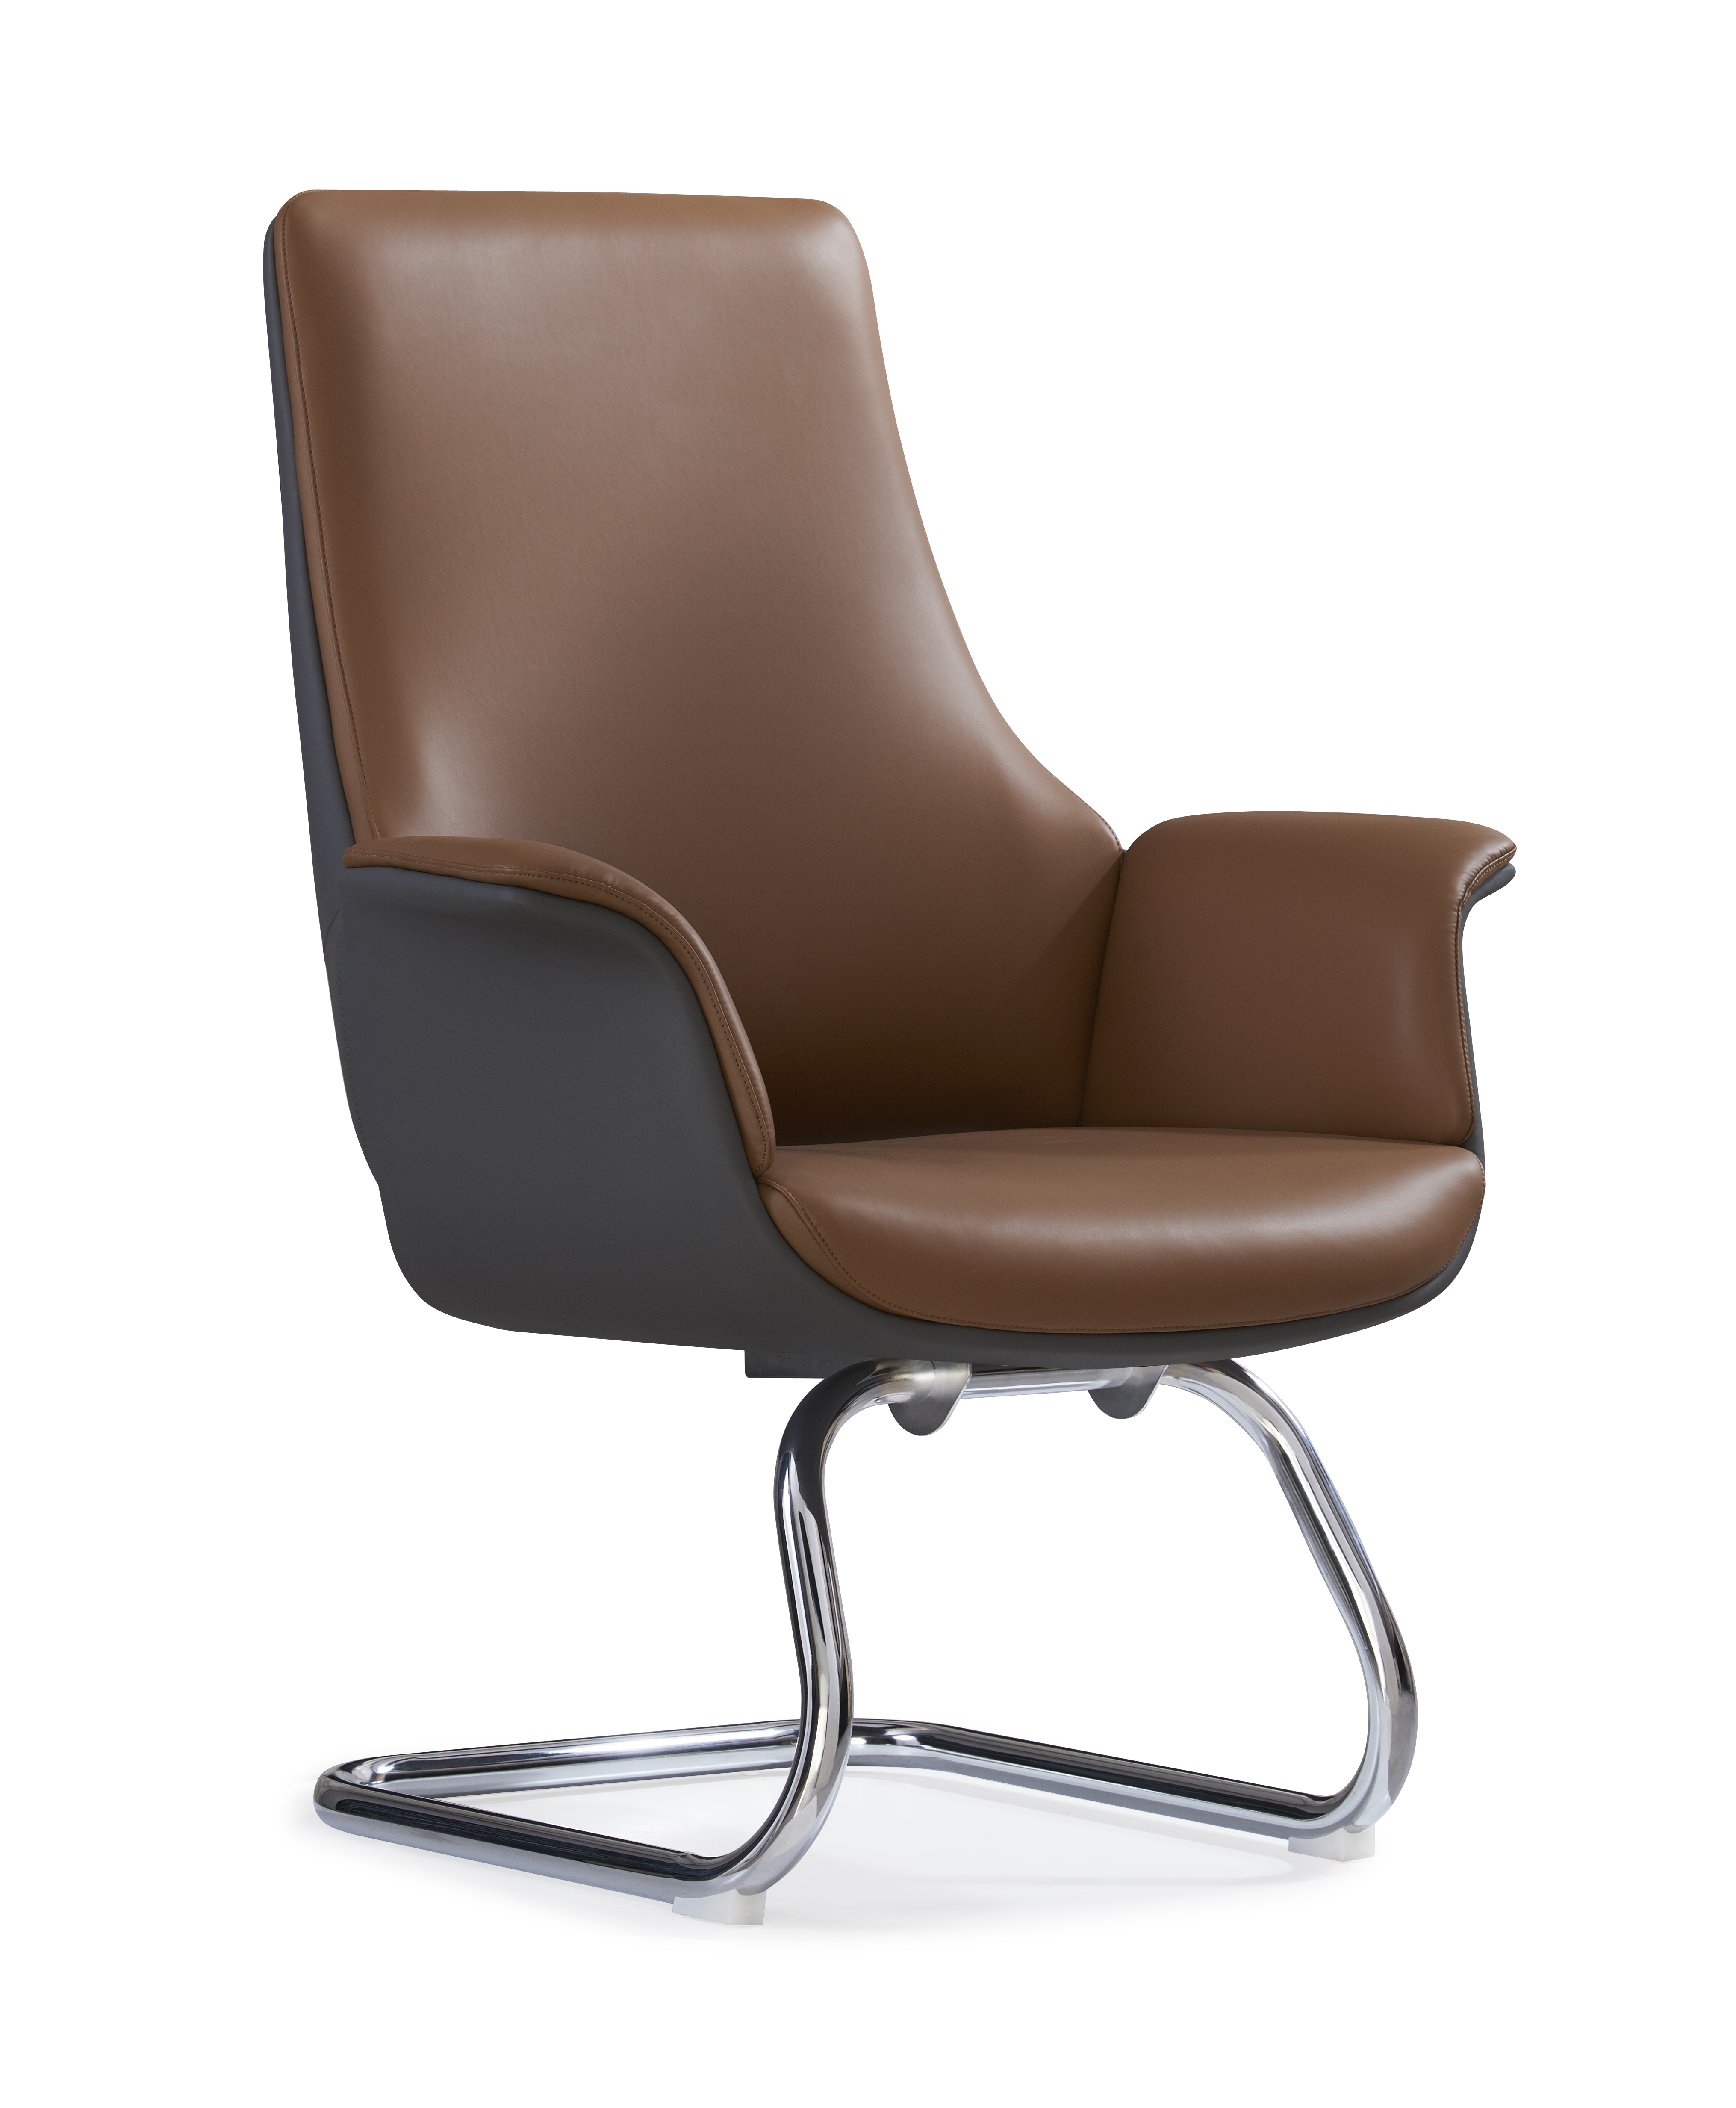 Fixed Leg Office Chair OEM: The Ultimate Guide to Finding the Perfect Chair for Your Office